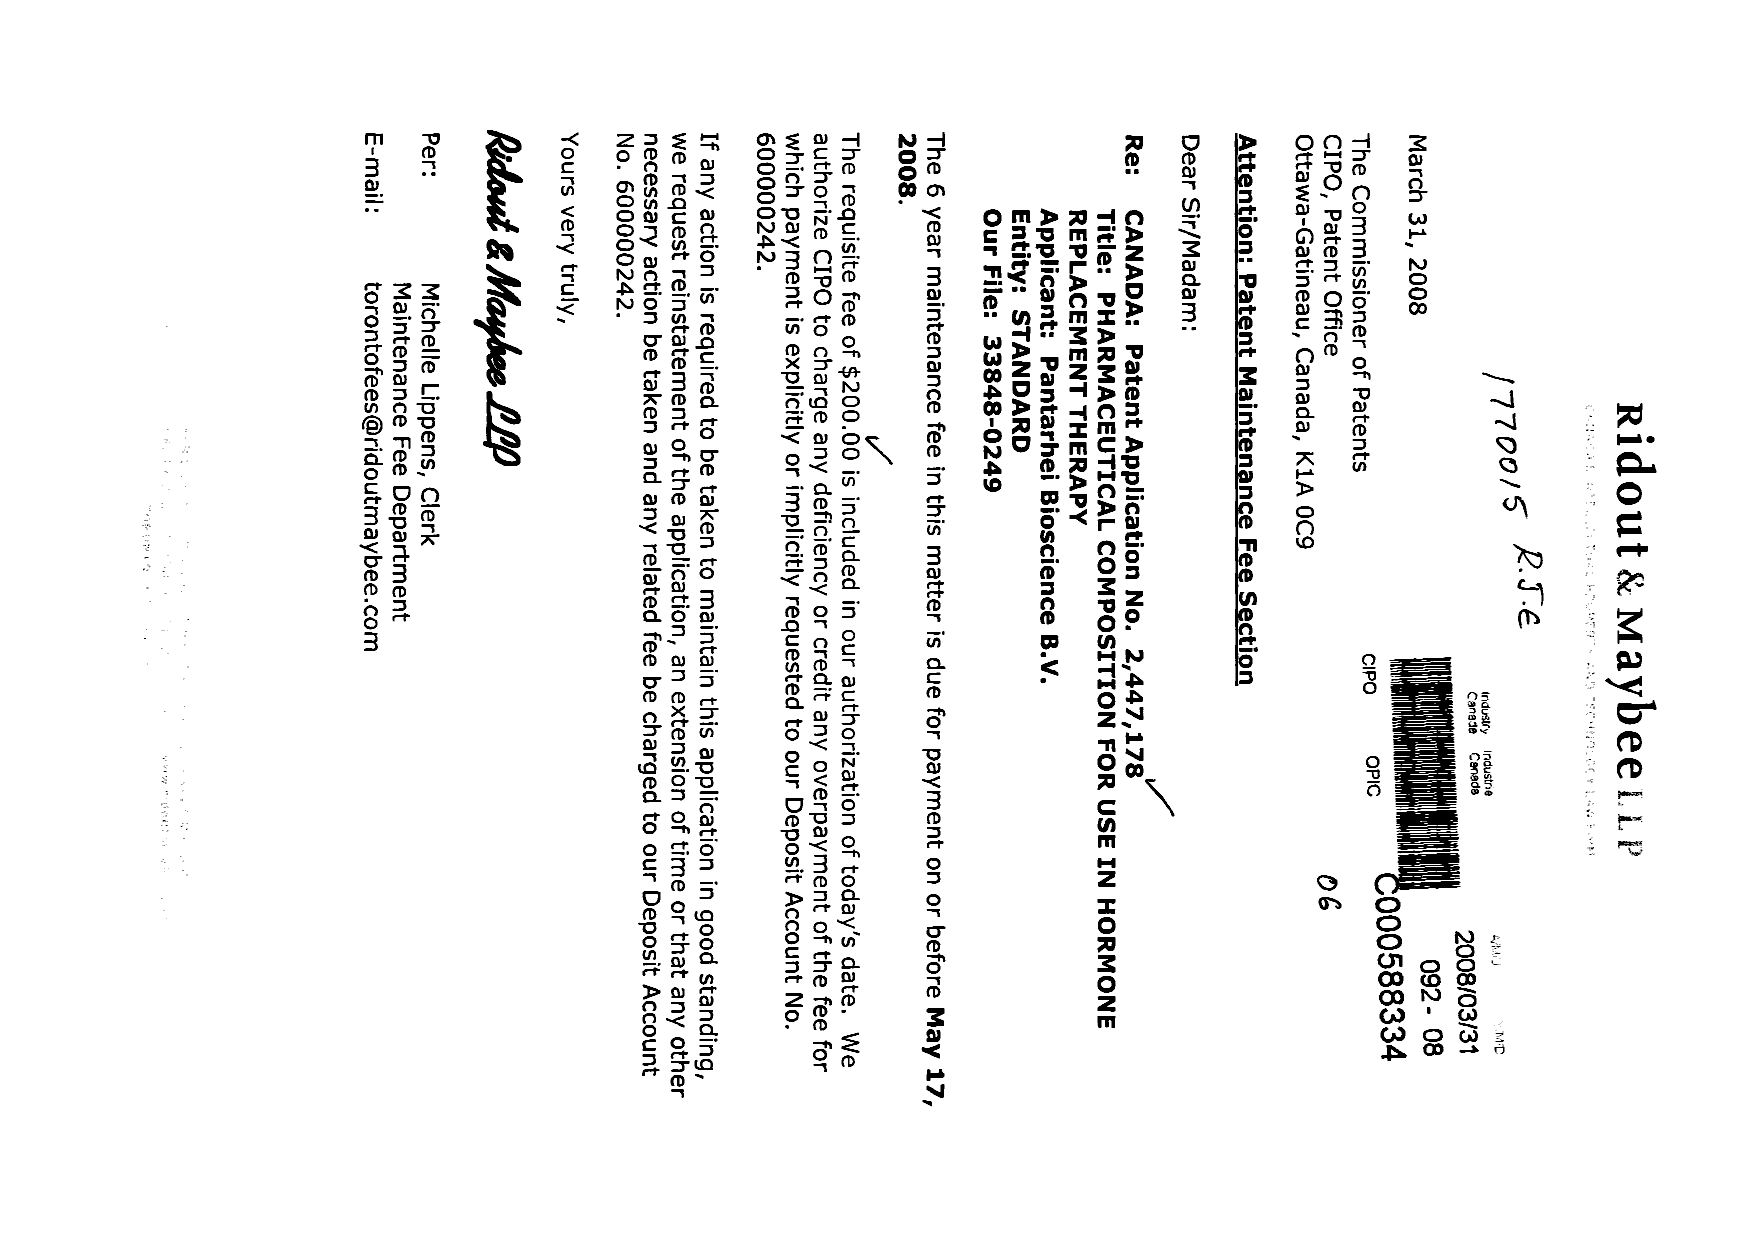 Canadian Patent Document 2447178. Fees 20080331. Image 1 of 1